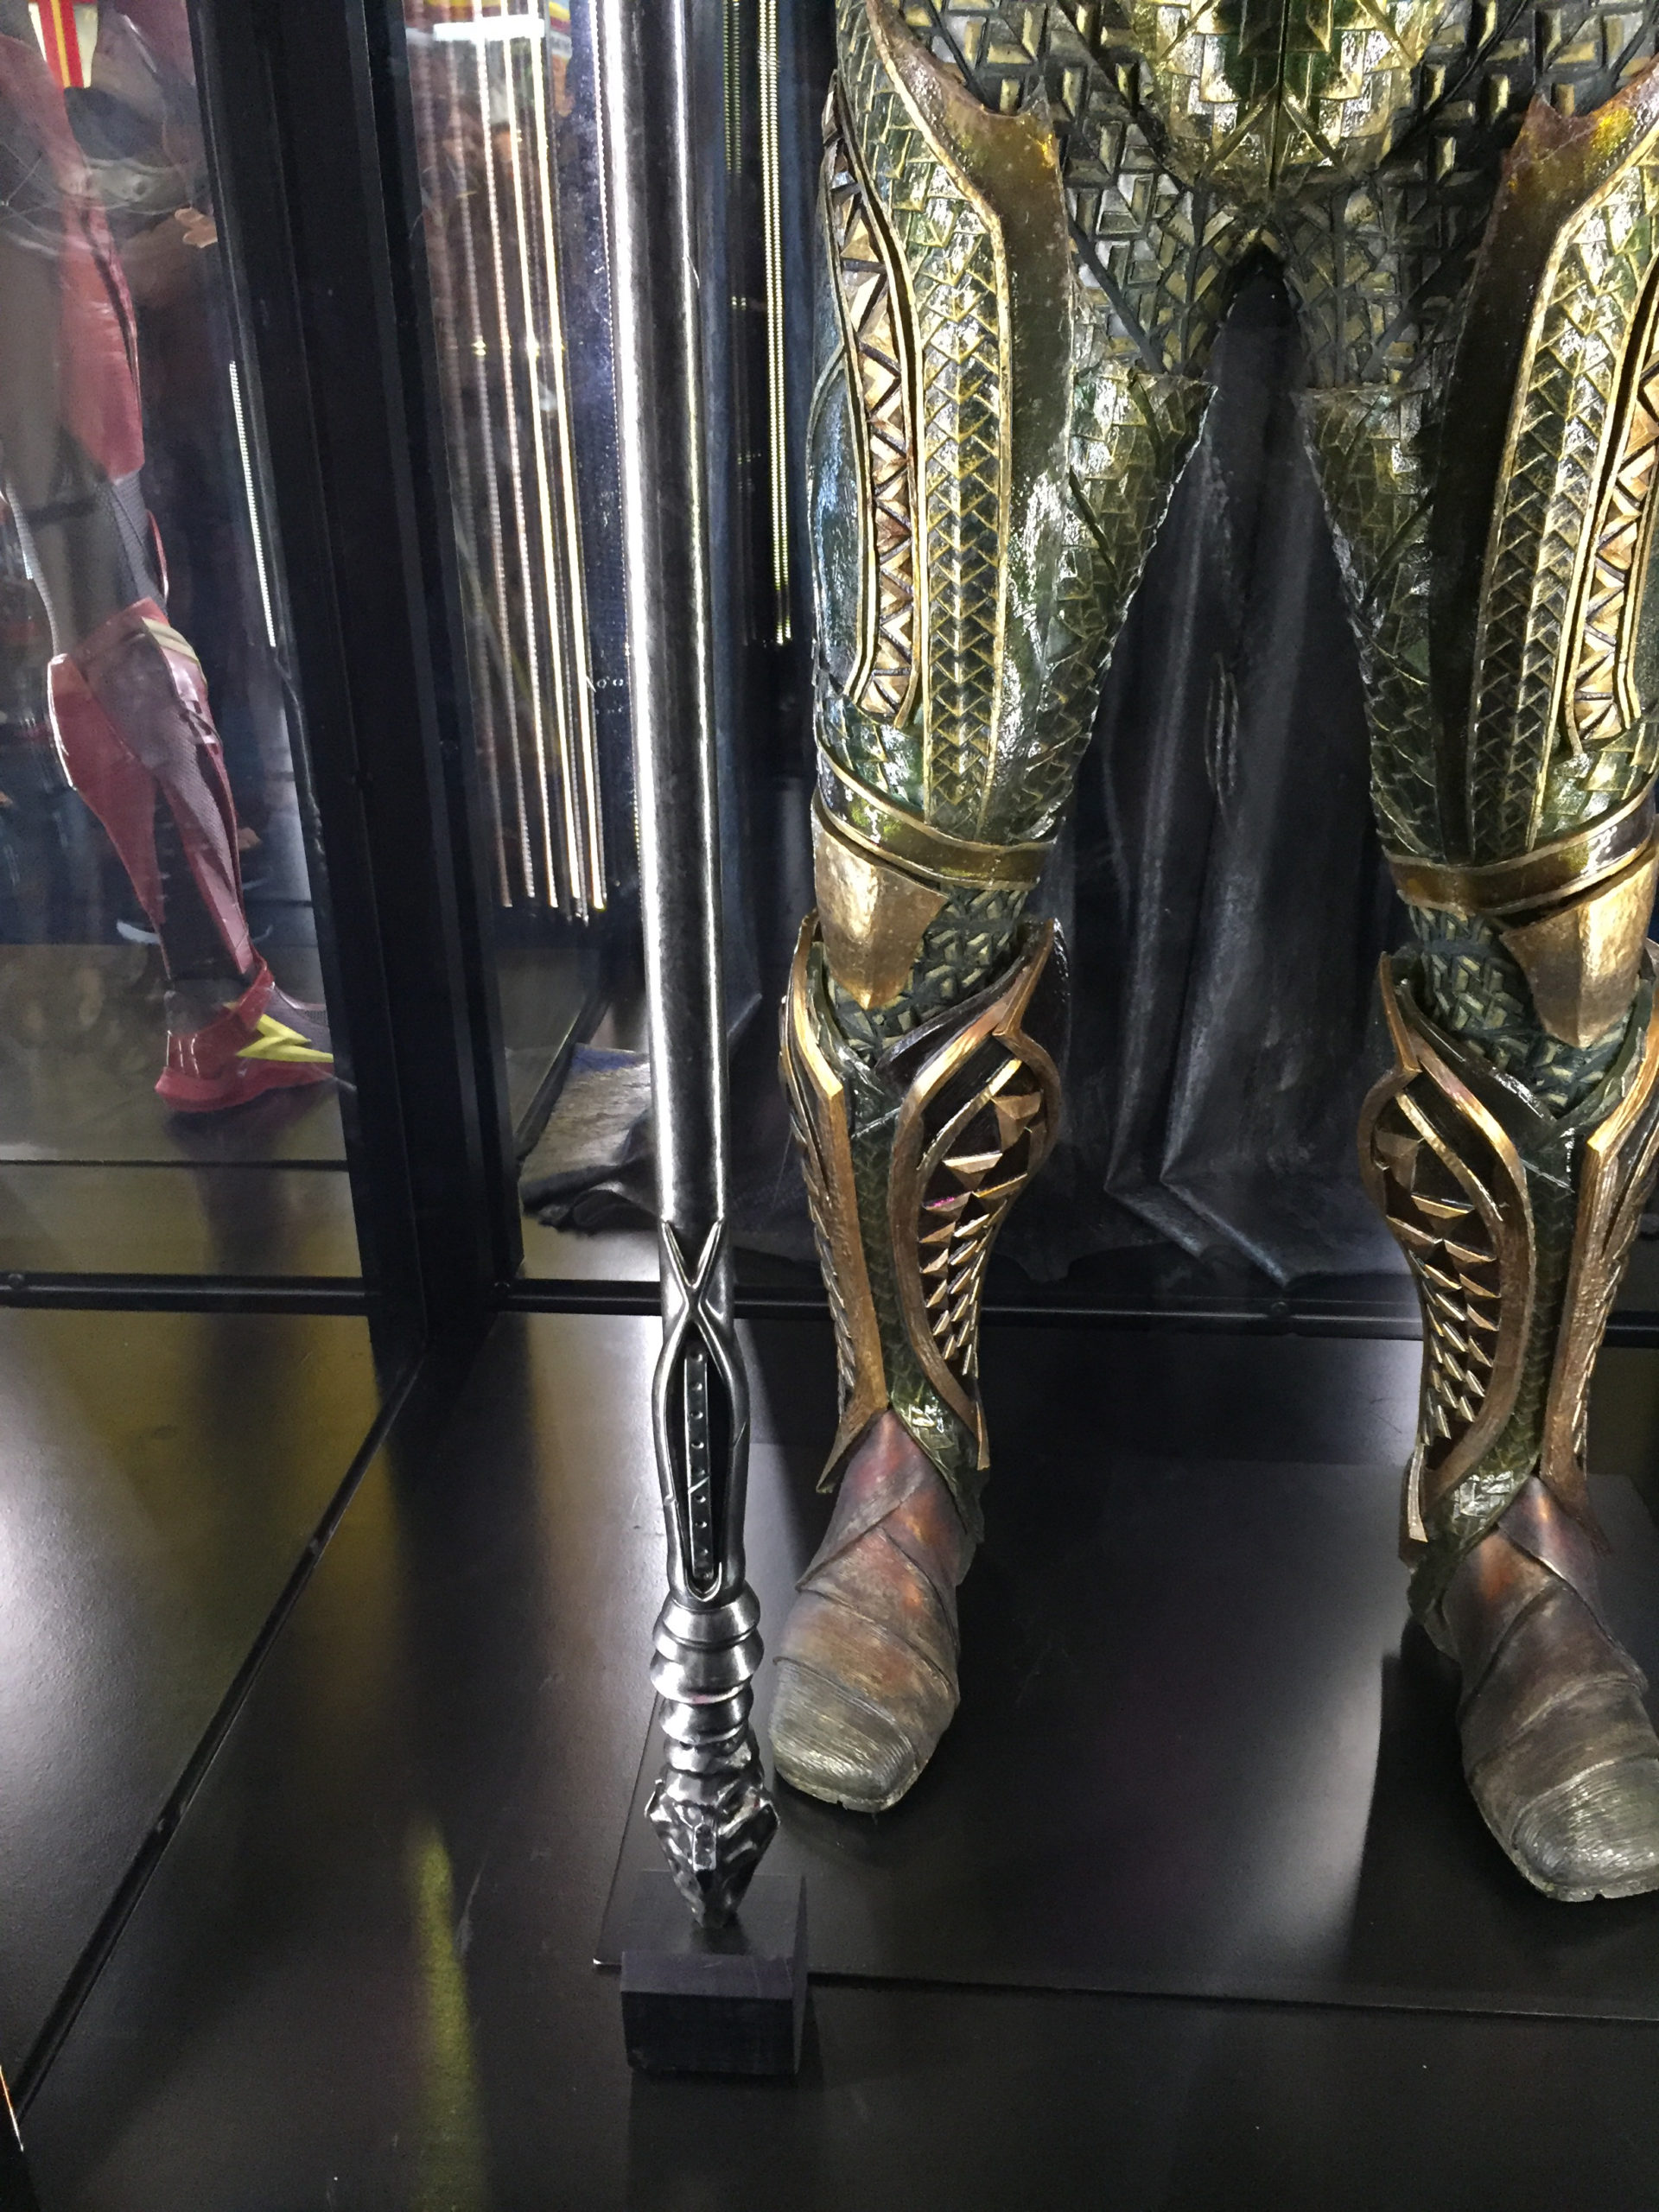 Up Close And Personal With The Justice League’s Movie Outfits